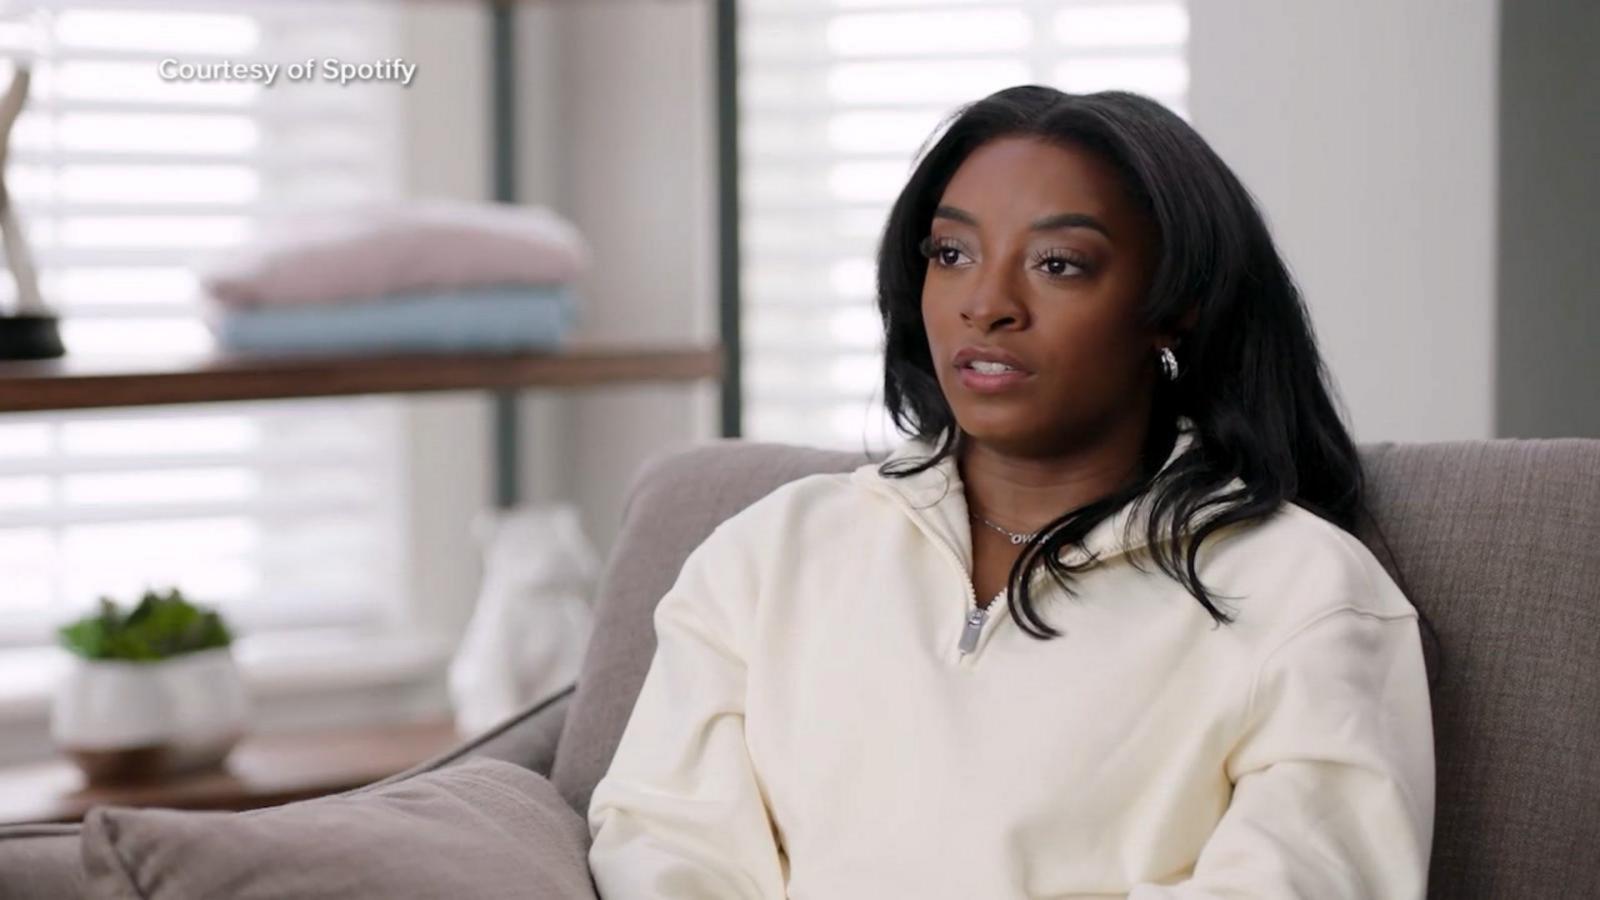 VIDEO: Simone Biles opens up about mental health battle